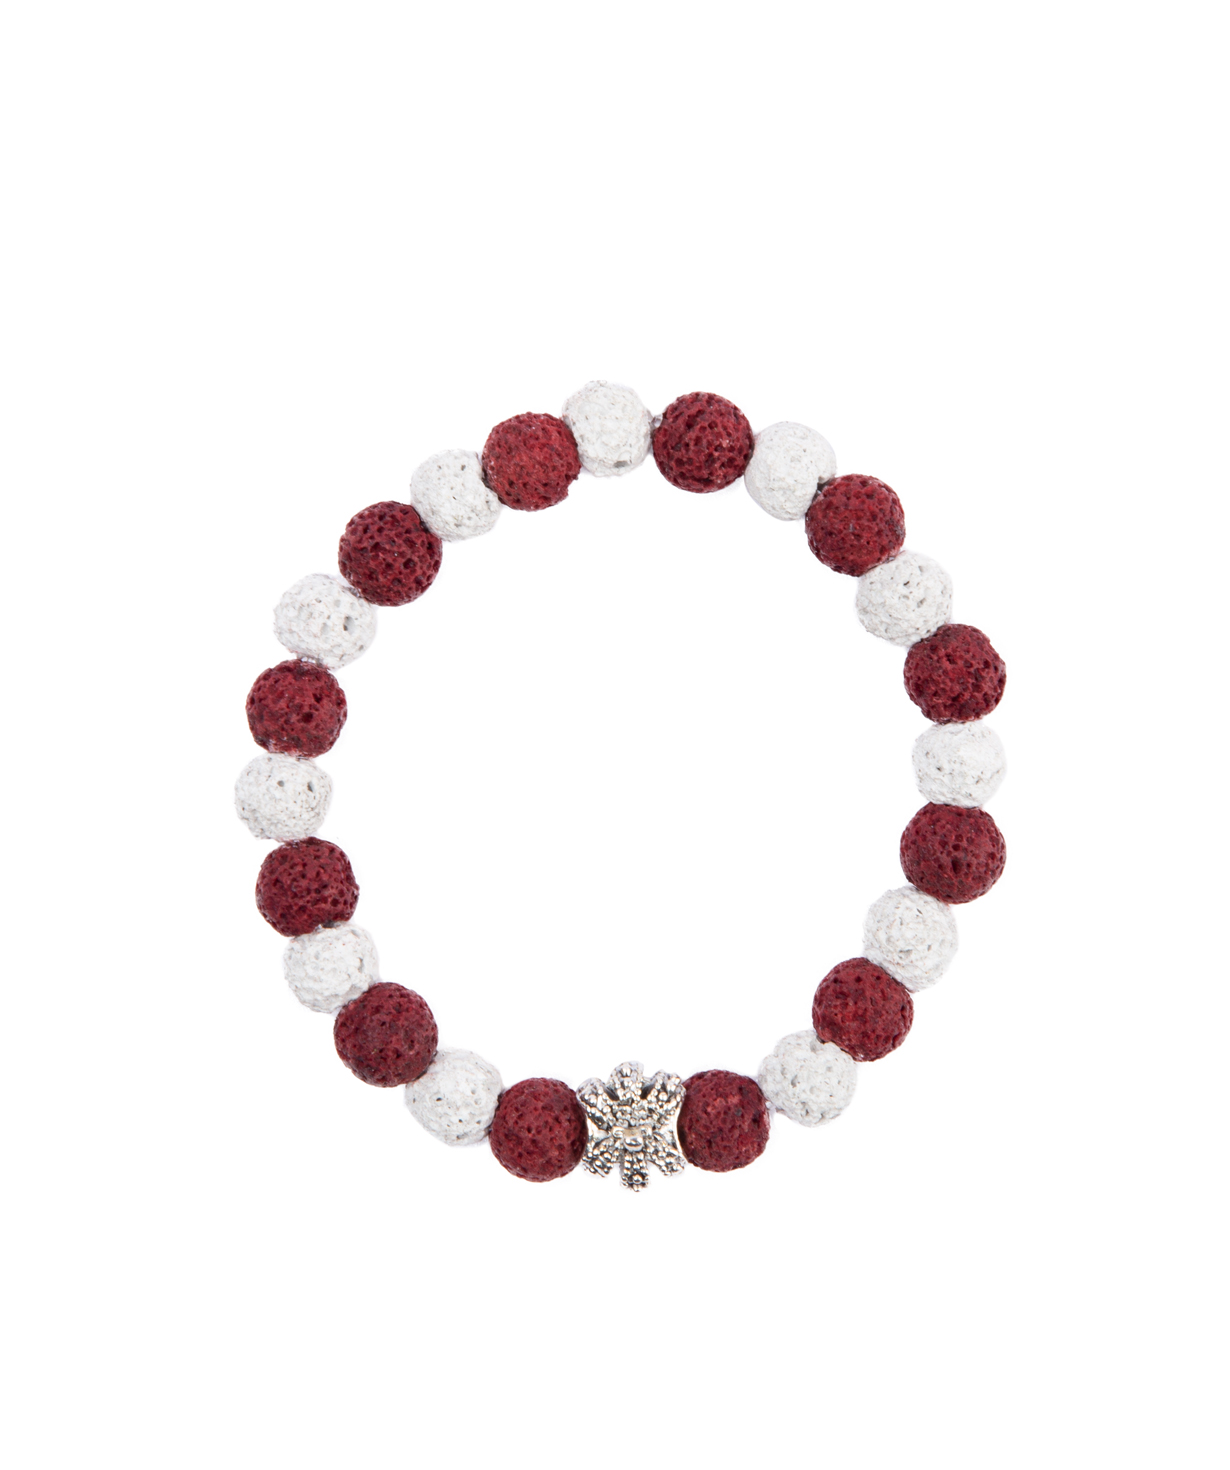 Womens bracelet with natural stones